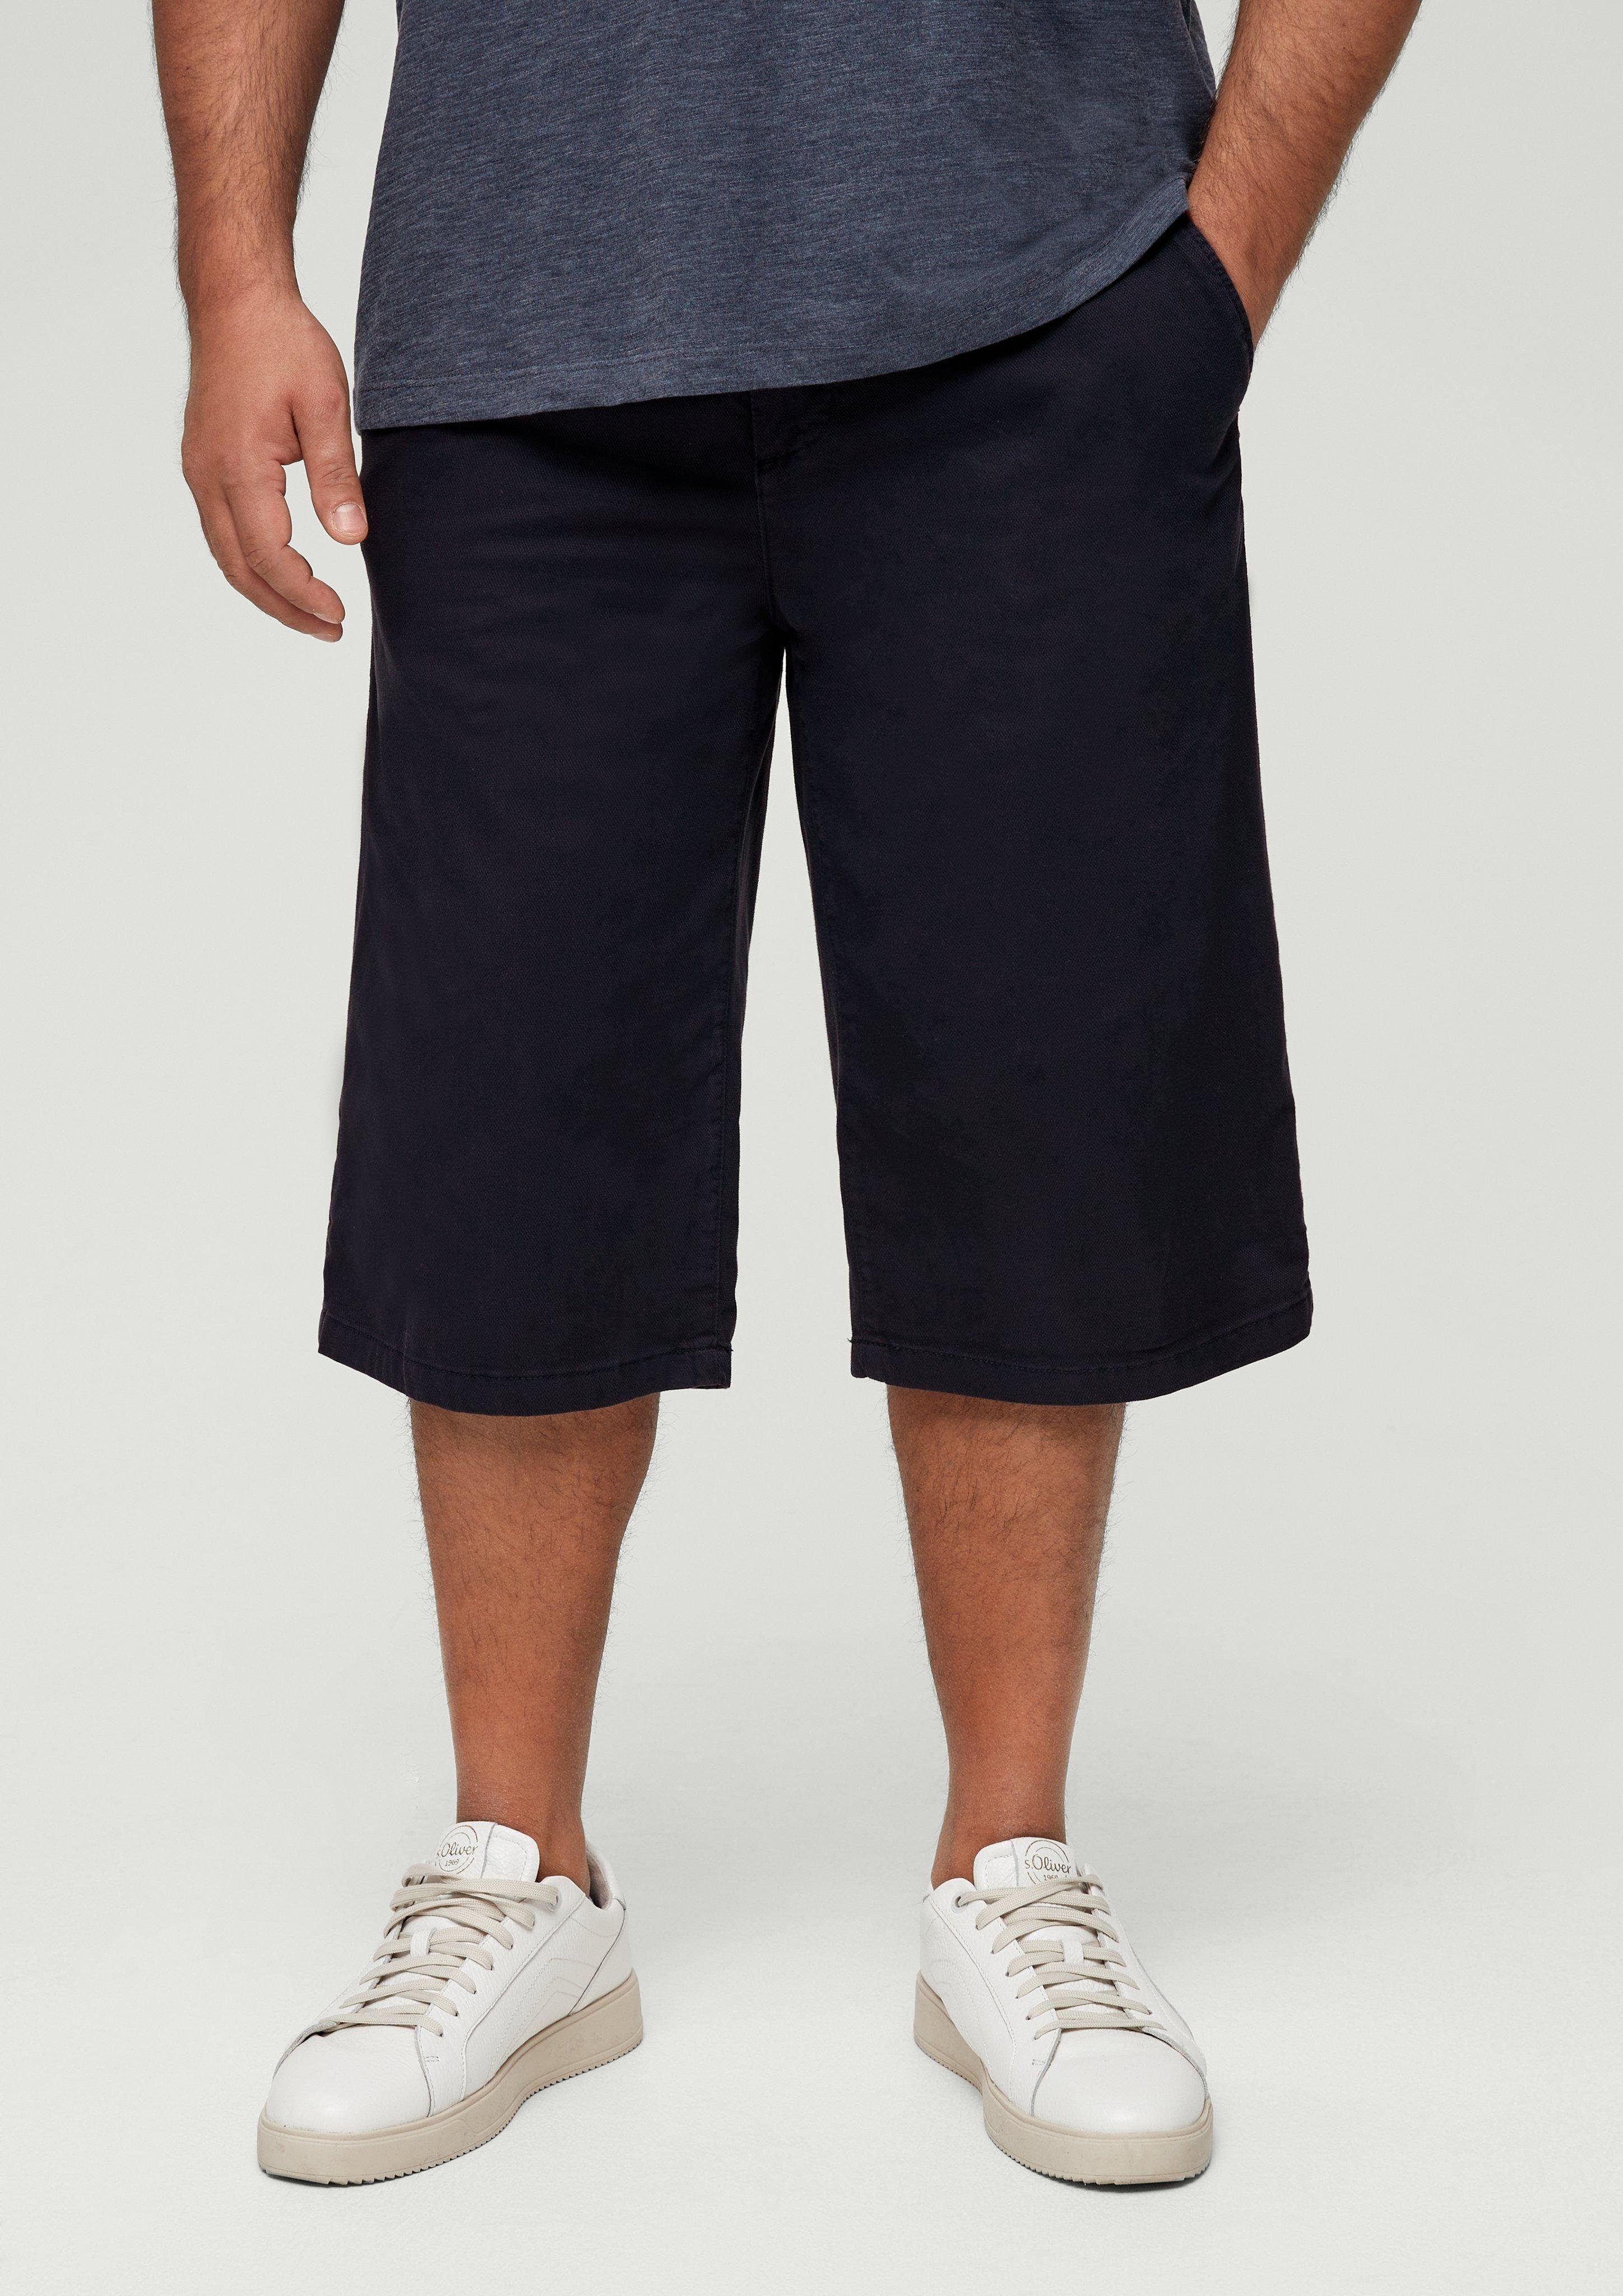 s.Oliver navy mit Relaxed: Stoffhose Bermuda Tunnelzug